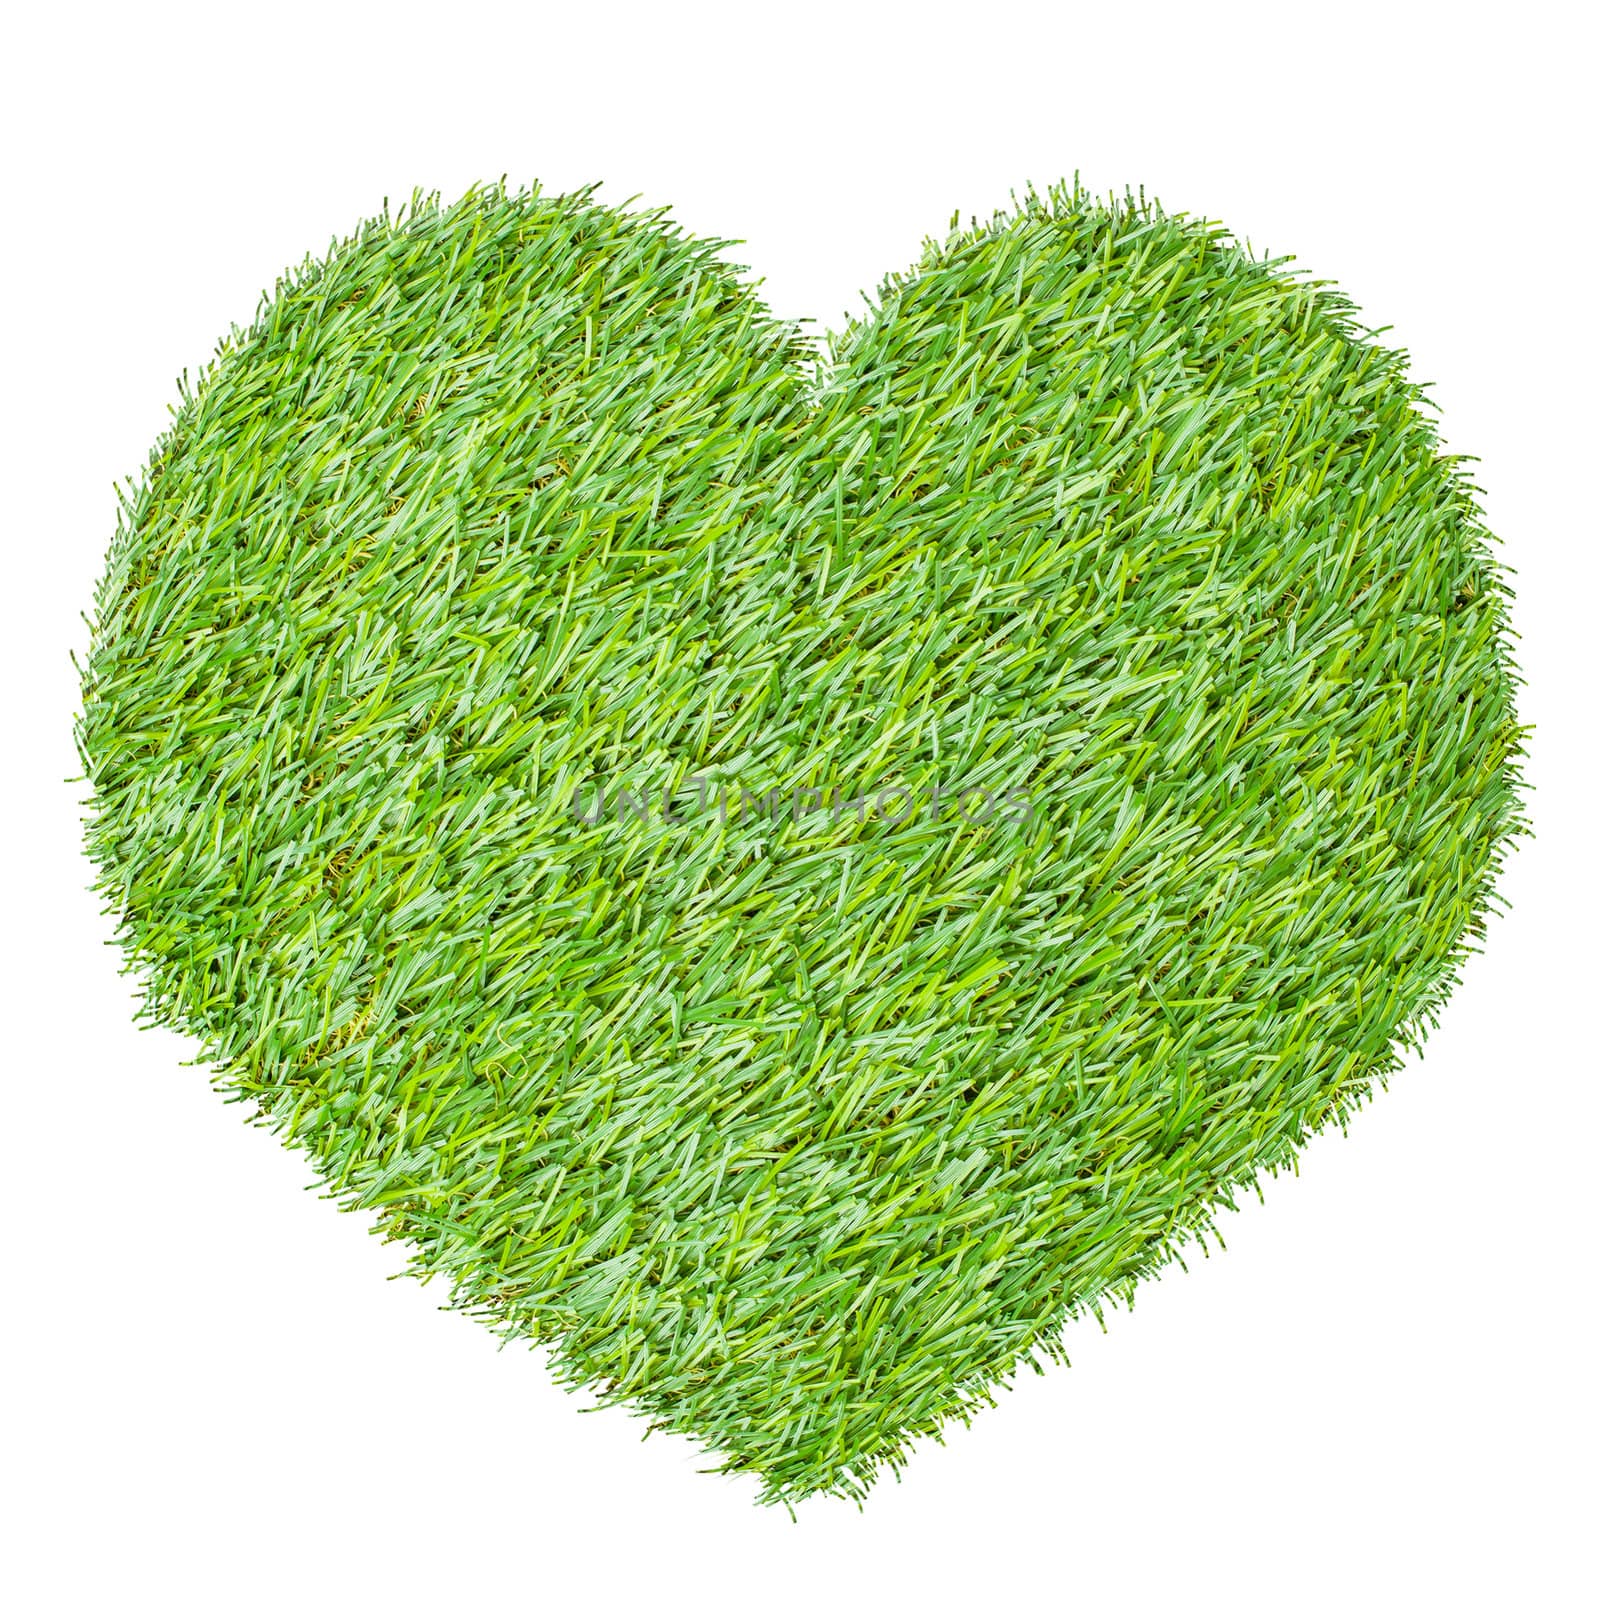 heart from the green grass, isolated on white